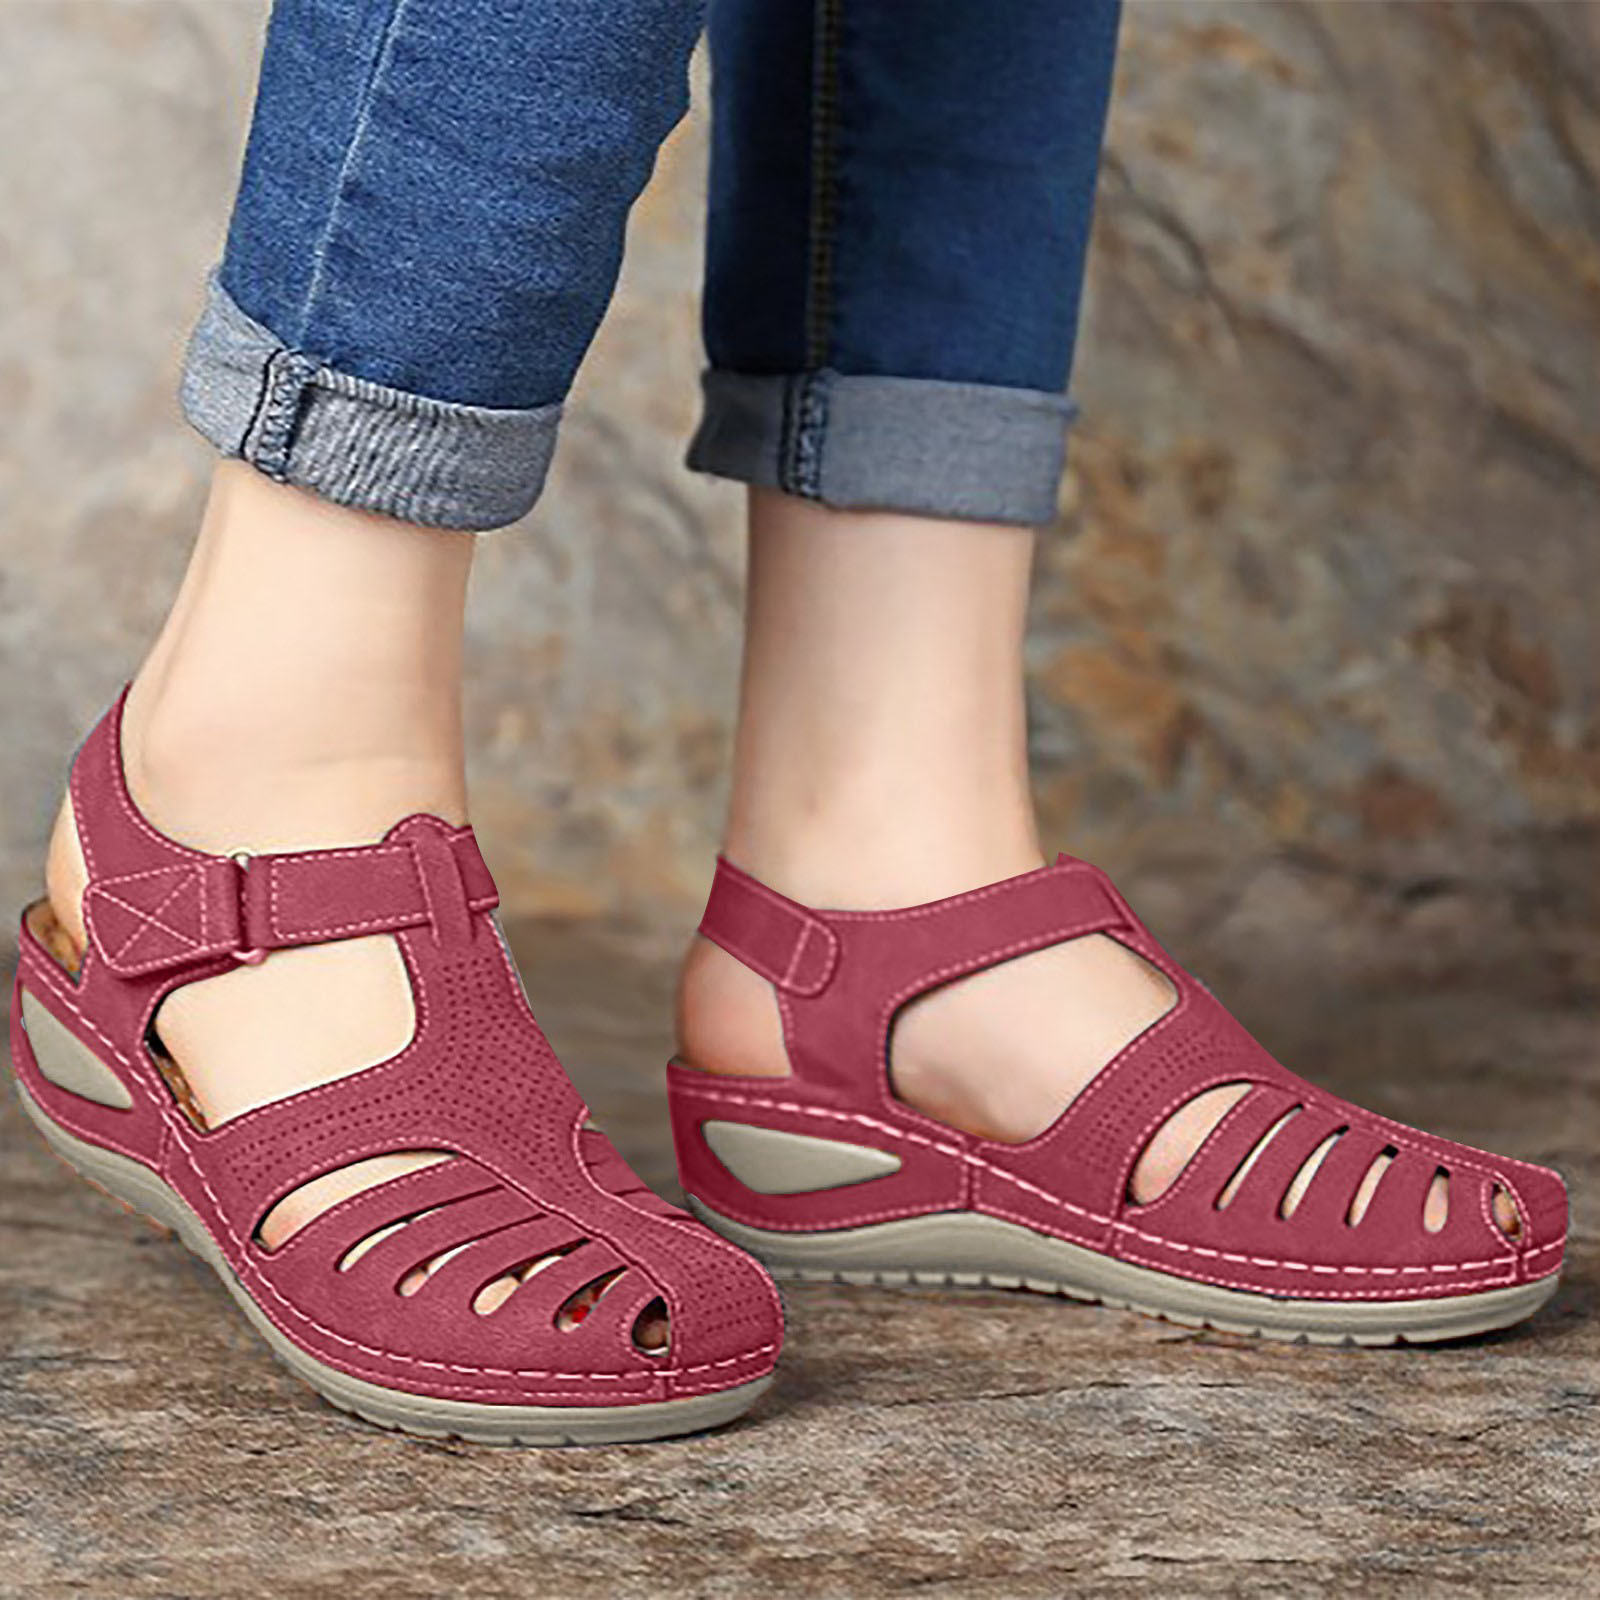 Orthopedic Sandals Women Closed Toe Wide Fit Sandals with Arch Support ...